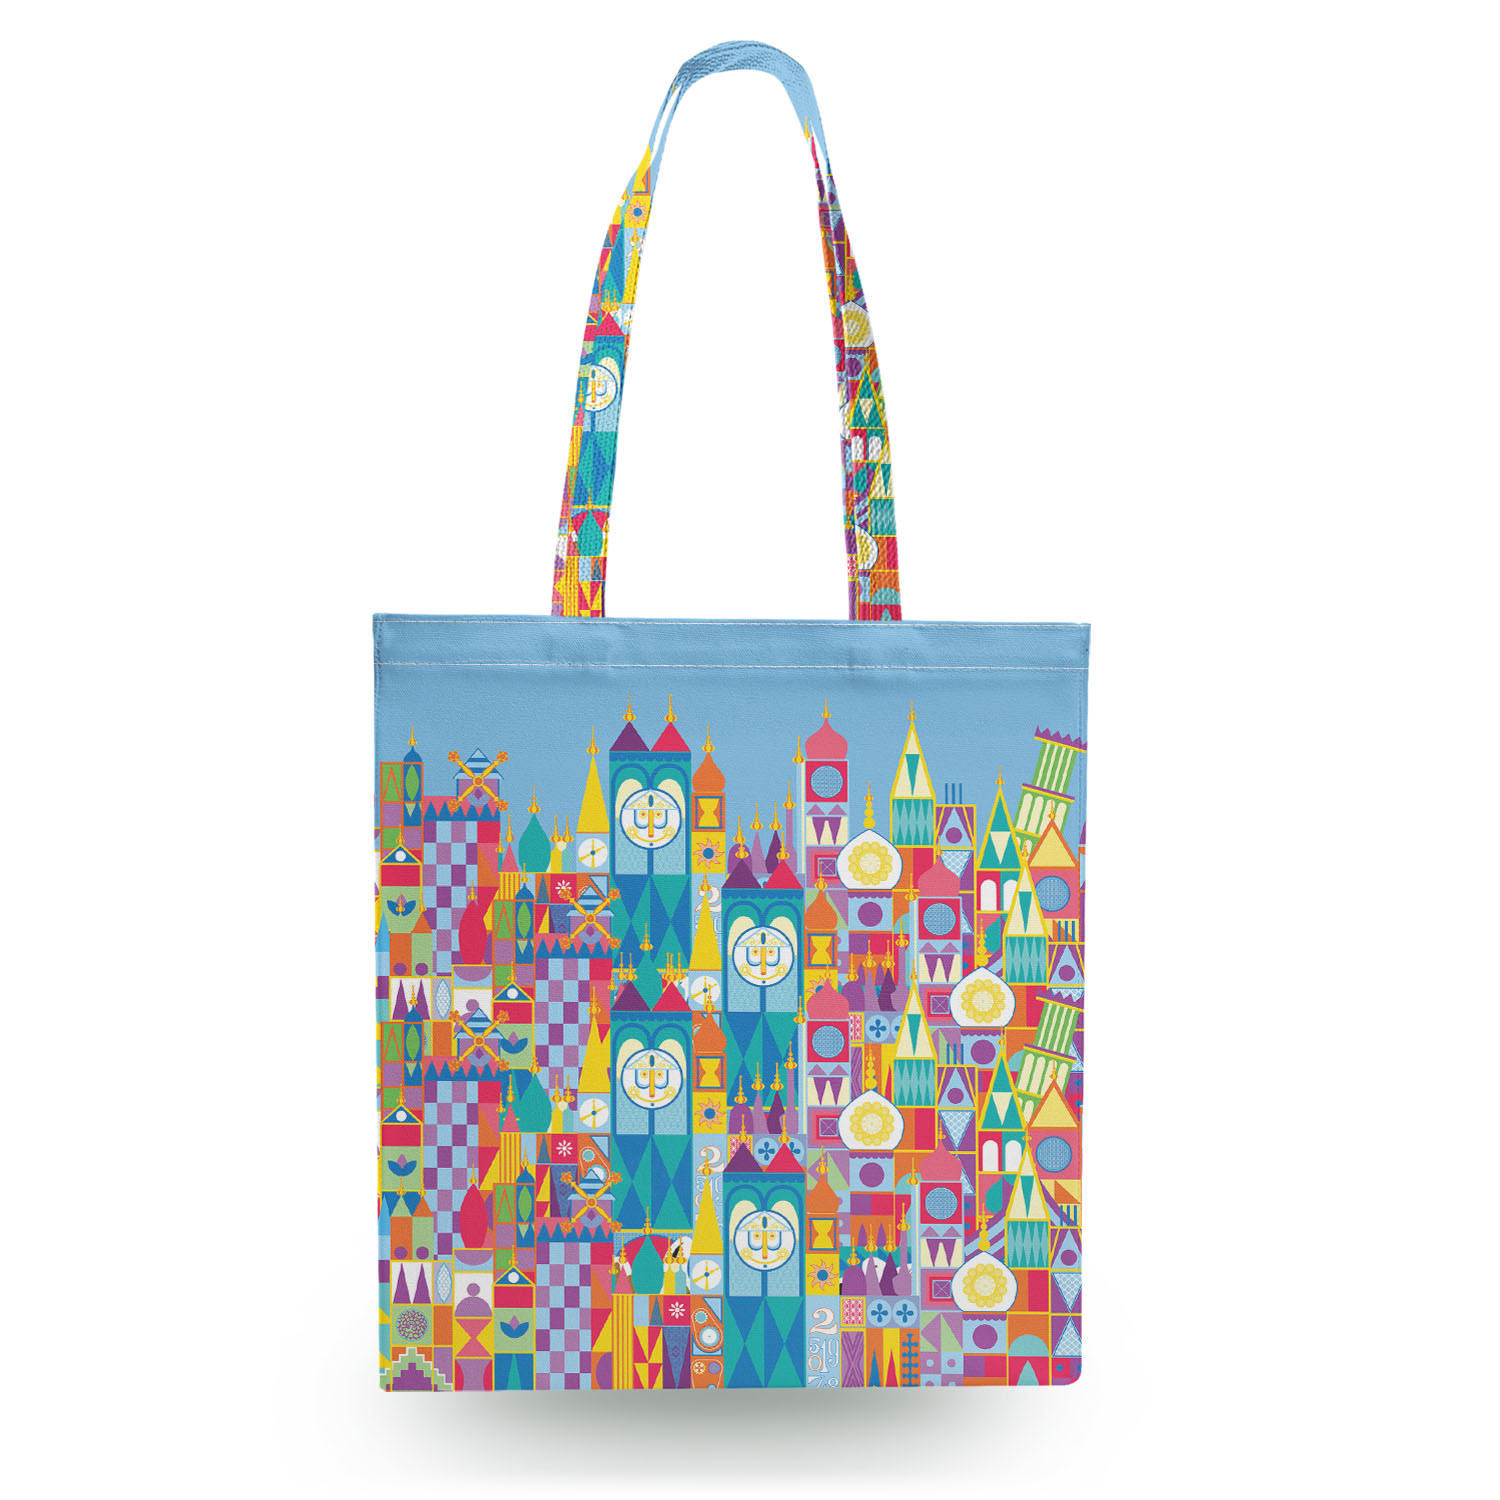 Its A Small World Disney Parks Inspired Canvas Tote Bag - Totes, Duffle Bags